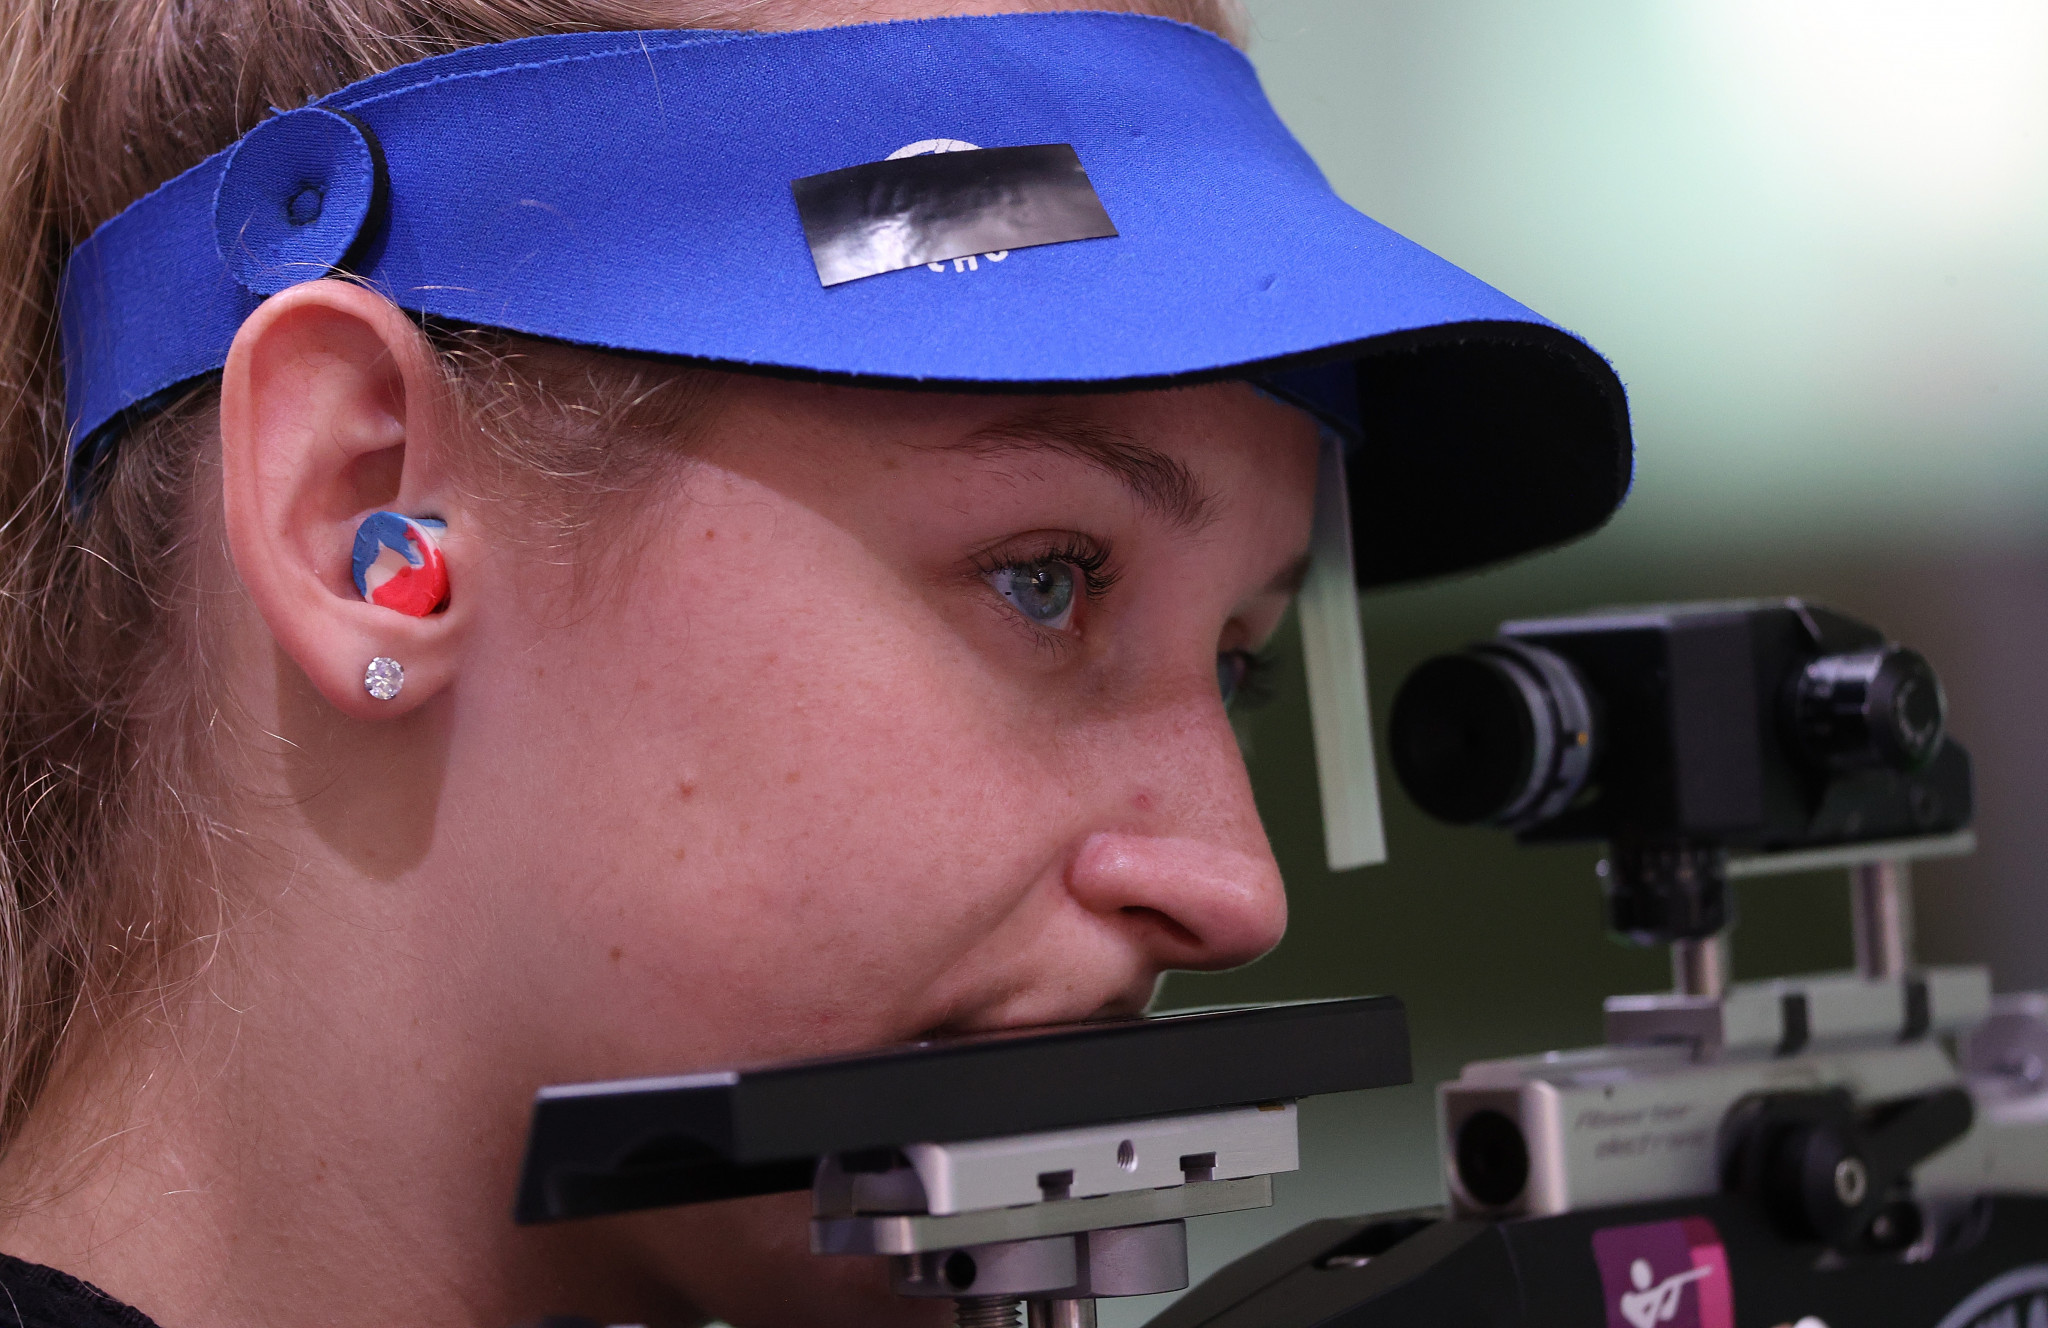 Alison Marie Weisz of the United States won the women's 10 metres air rifle title at the World Shooting Championships in Cairo ©Getty Images